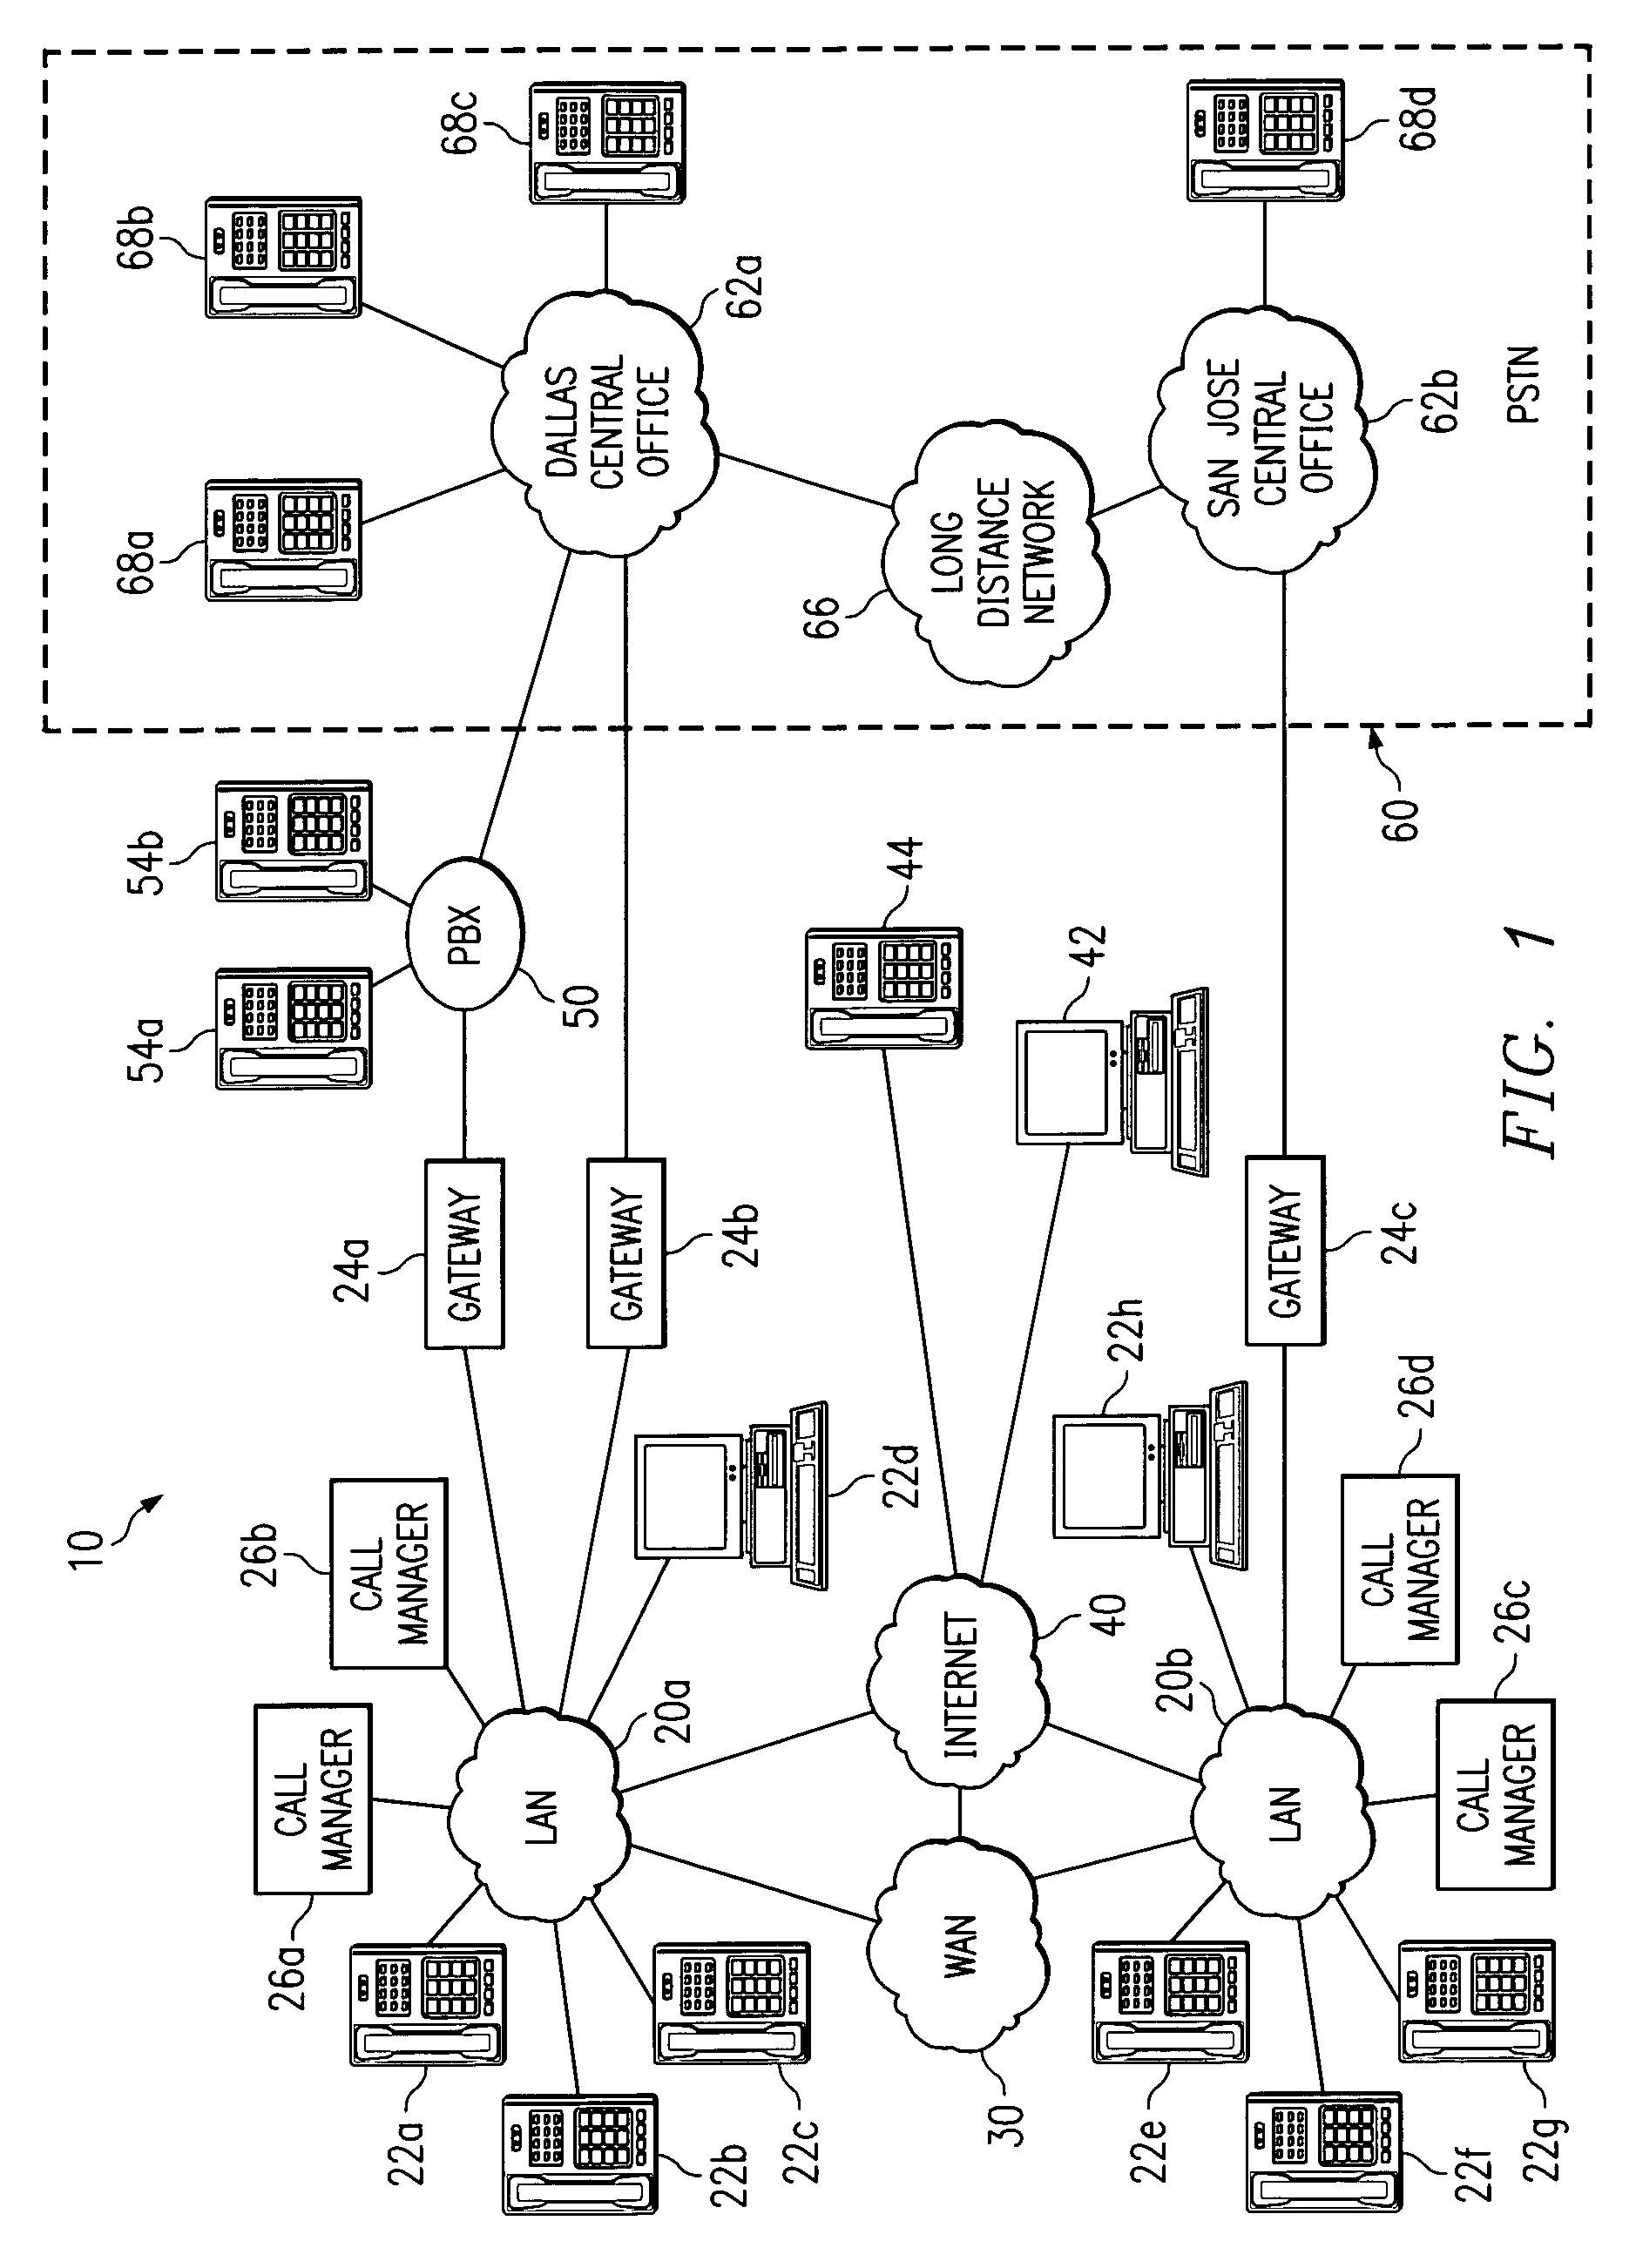 System and method for routing calls using dialing partitions